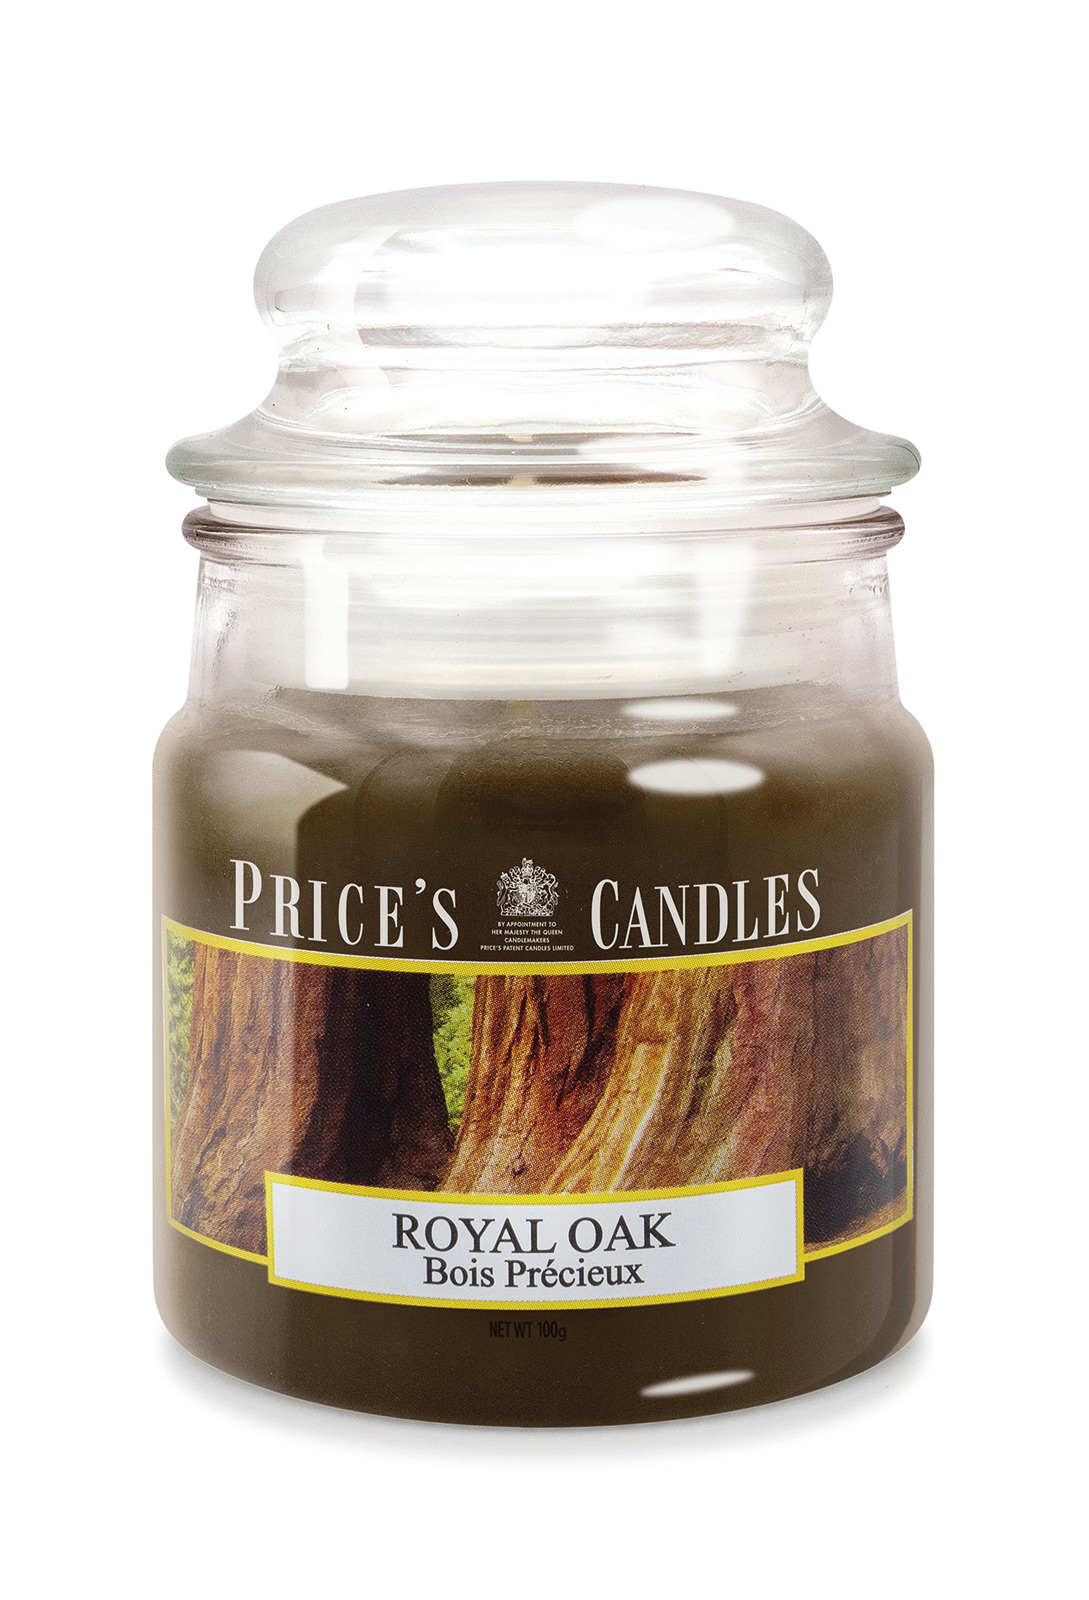 Prices Candle "Royal Oak" 100g 